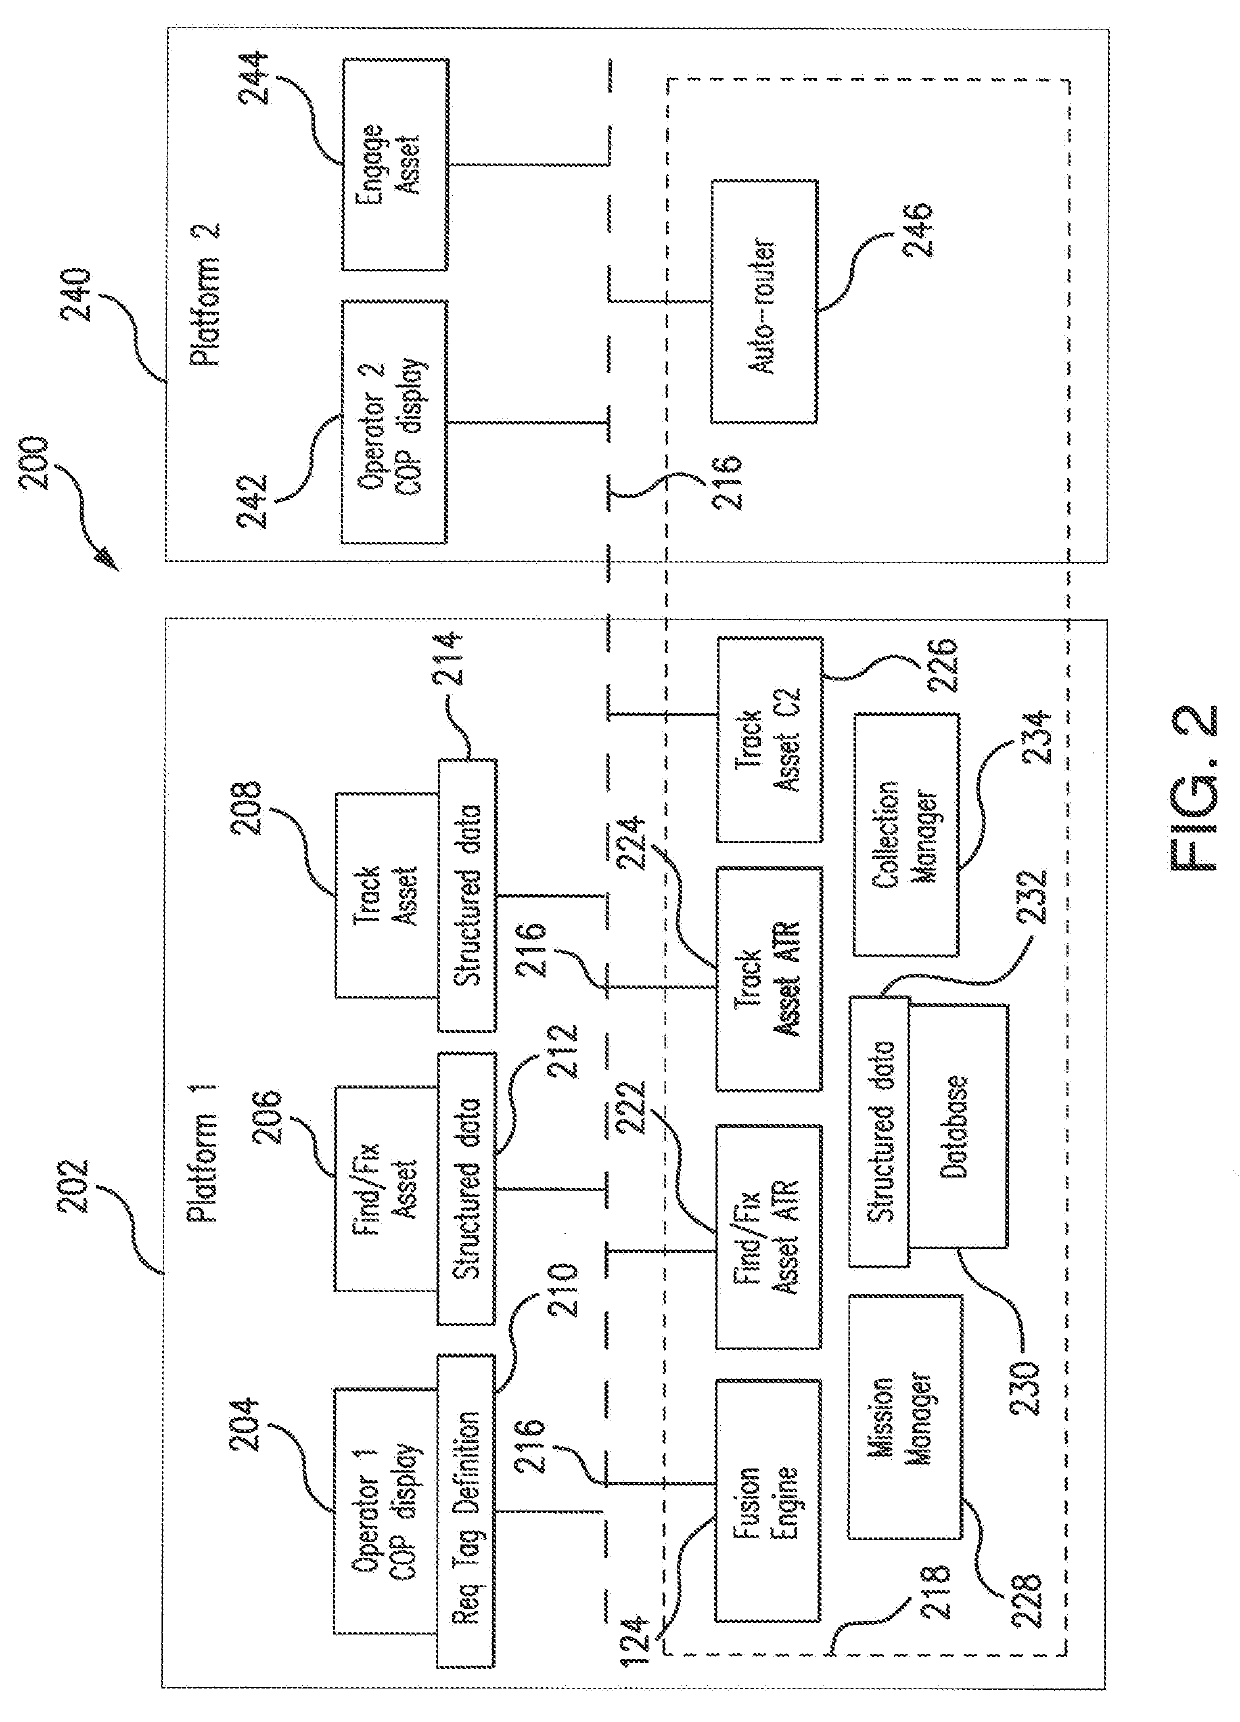 Multi-domain operational environment utilizing a common information layer